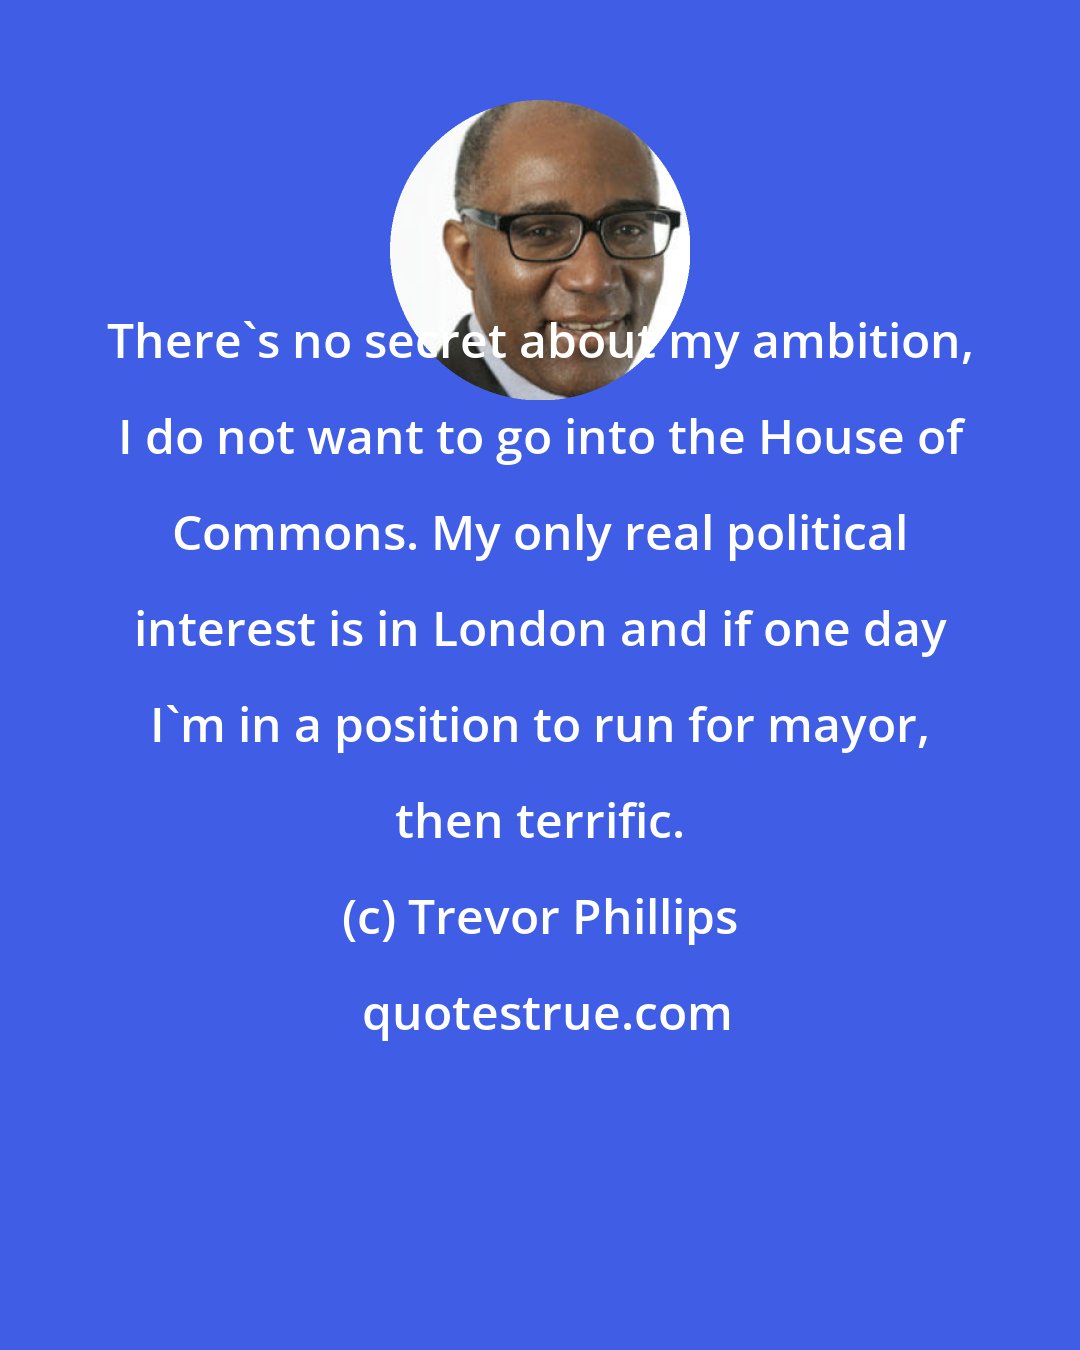 Trevor Phillips: There's no secret about my ambition, I do not want to go into the House of Commons. My only real political interest is in London and if one day I'm in a position to run for mayor, then terrific.